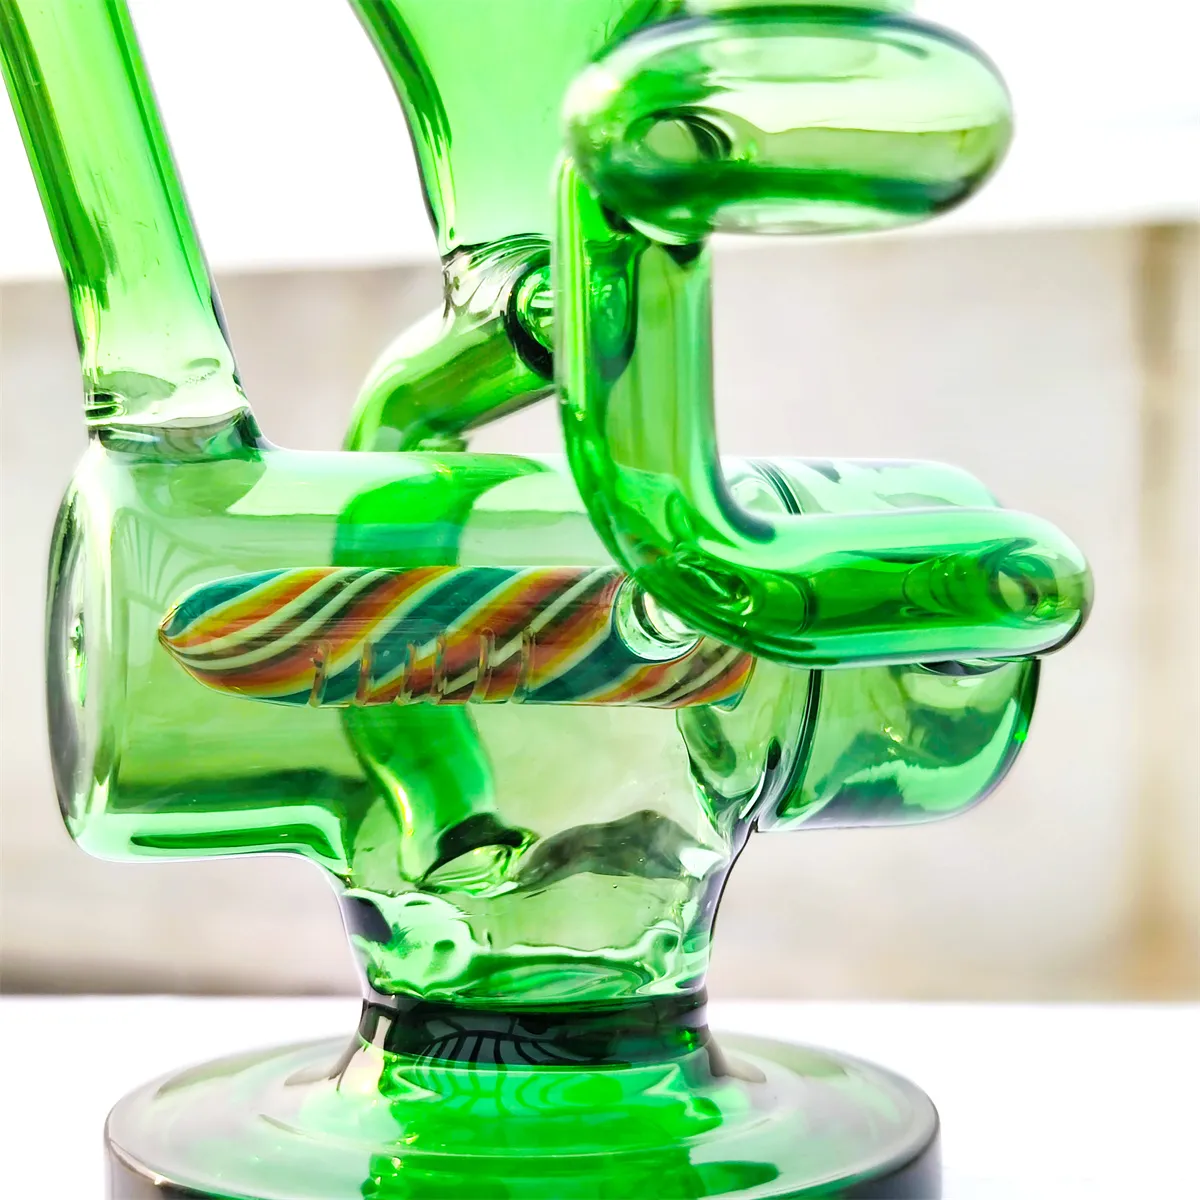 2024 Multi Color Green Wig Wag Colorful Filter 8 Inch Glass Bongs Water Pipe Bong Tobacco Smoking Tube 14MM Bowl Dab Rig Recycler Bubbler Pipes